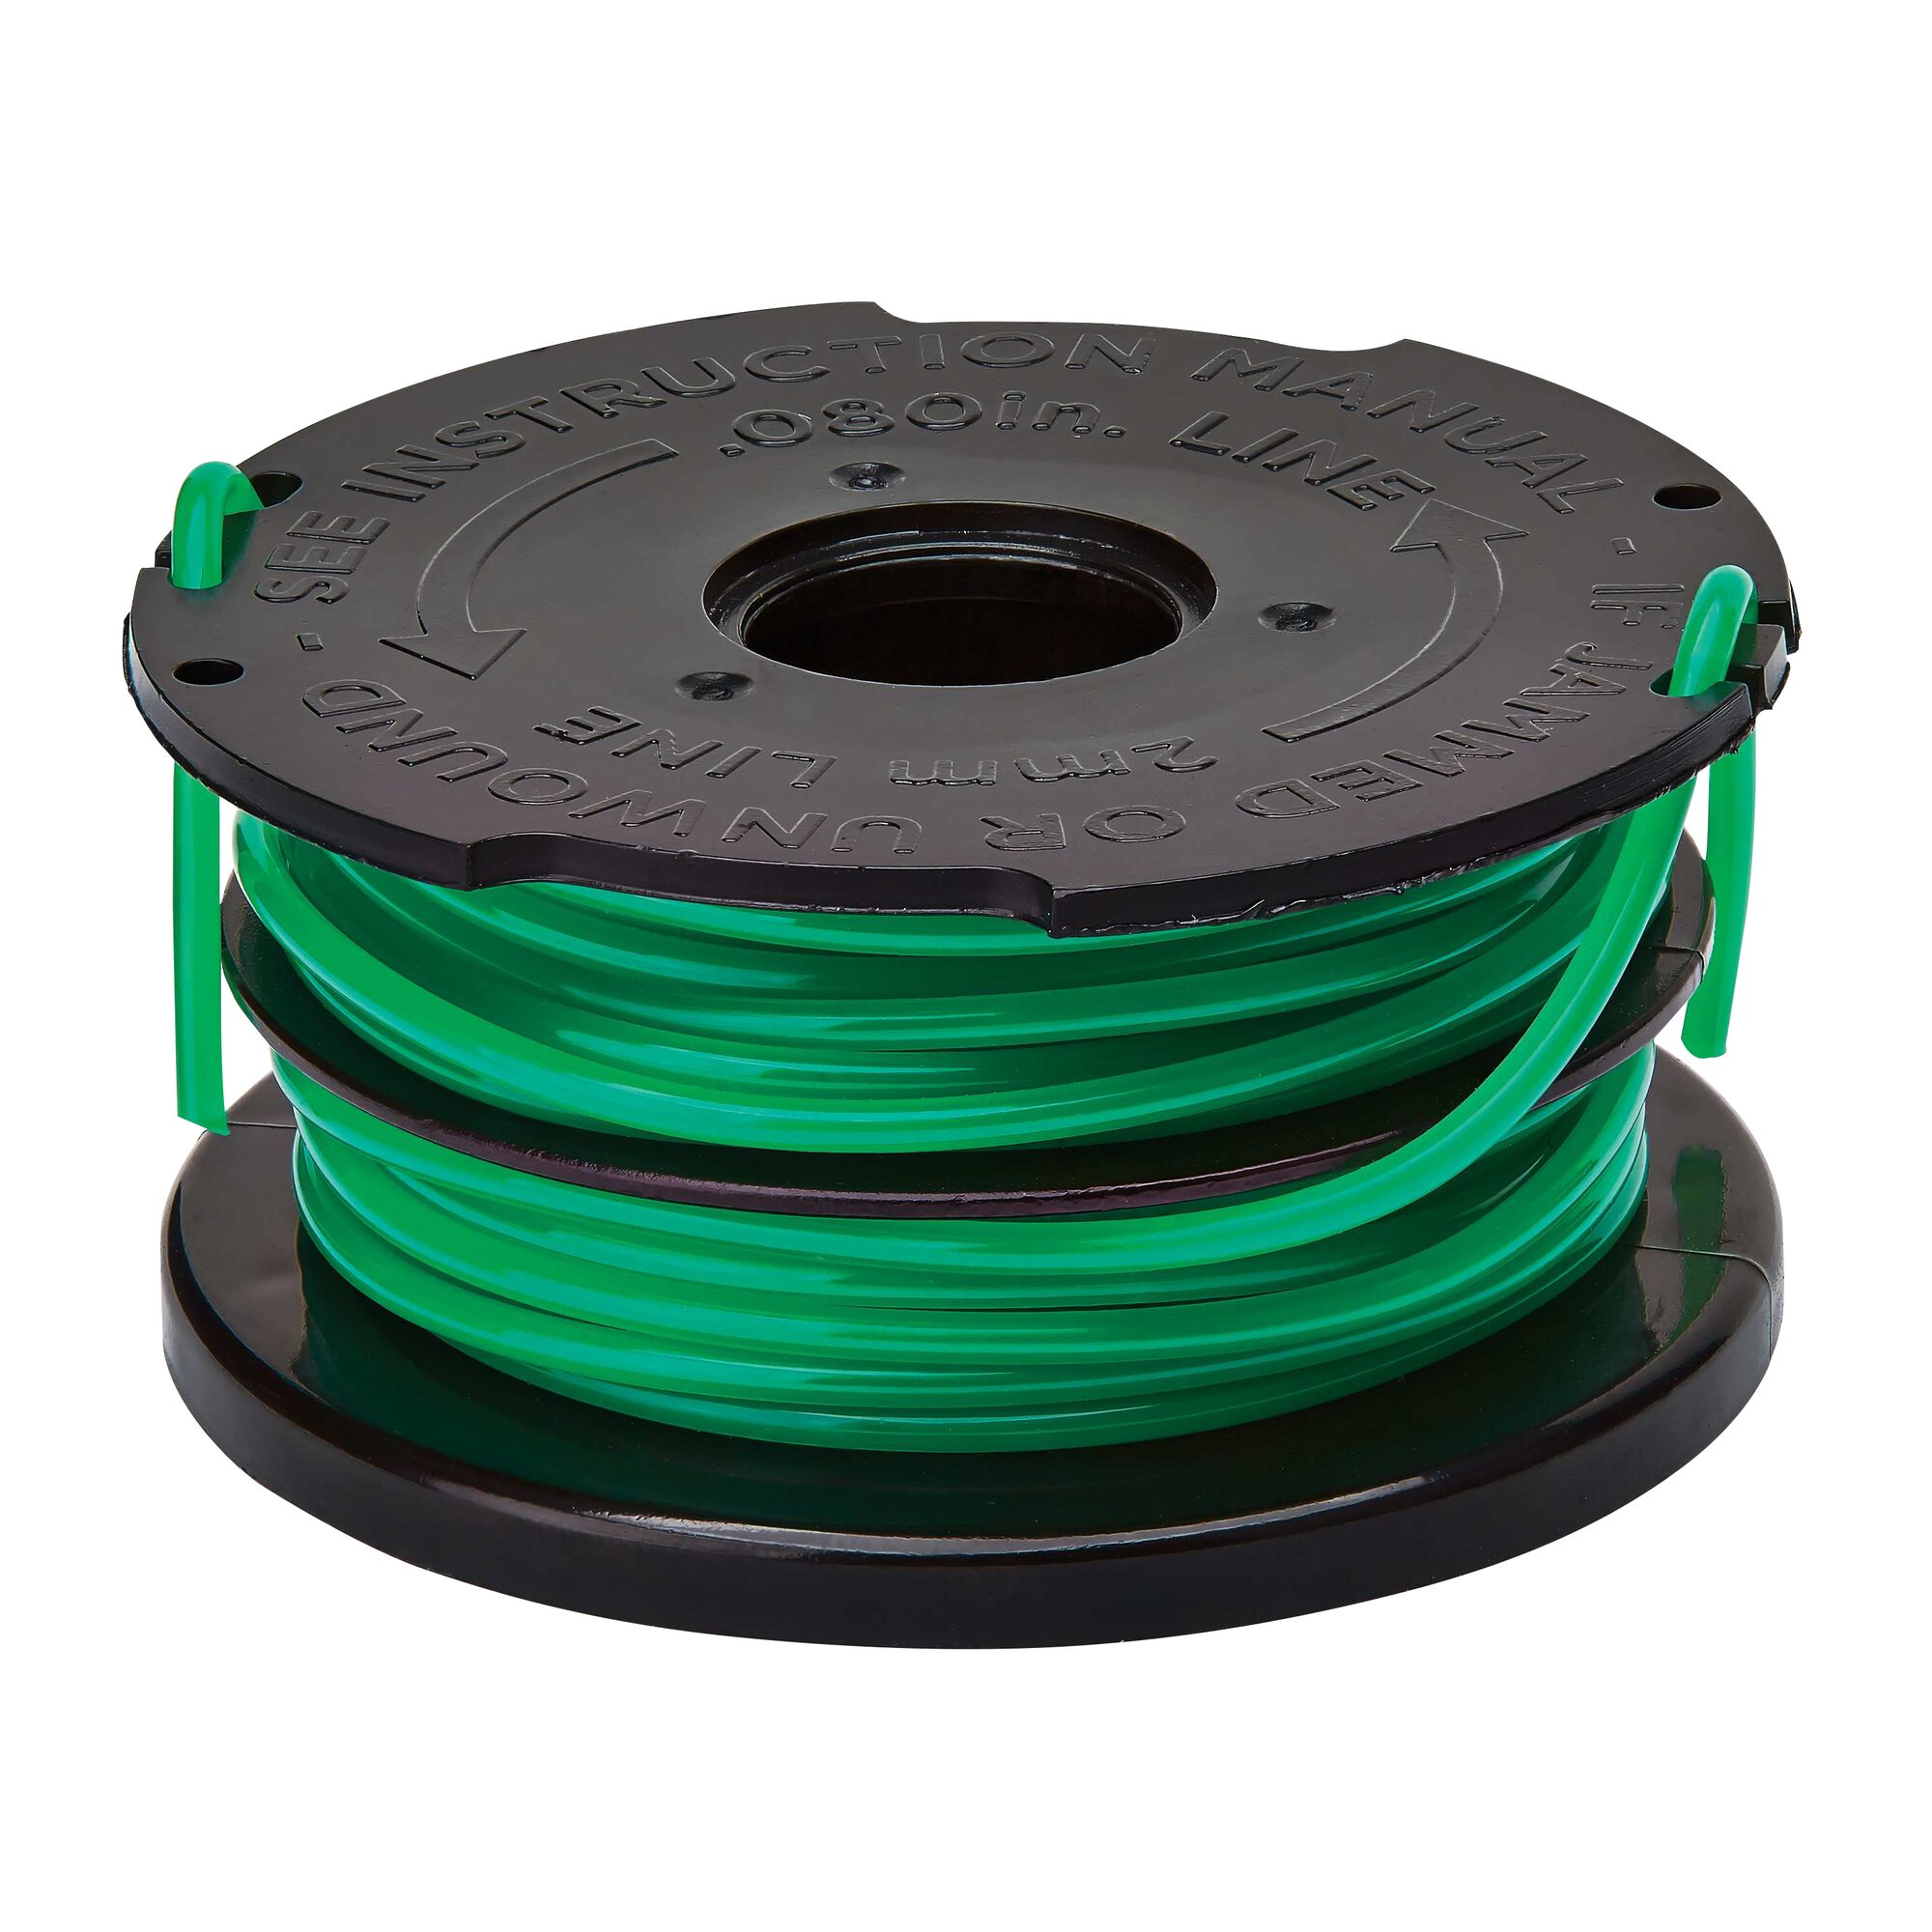 EASYFEED Dual Line Replacement Spool Eight hundredths inch.